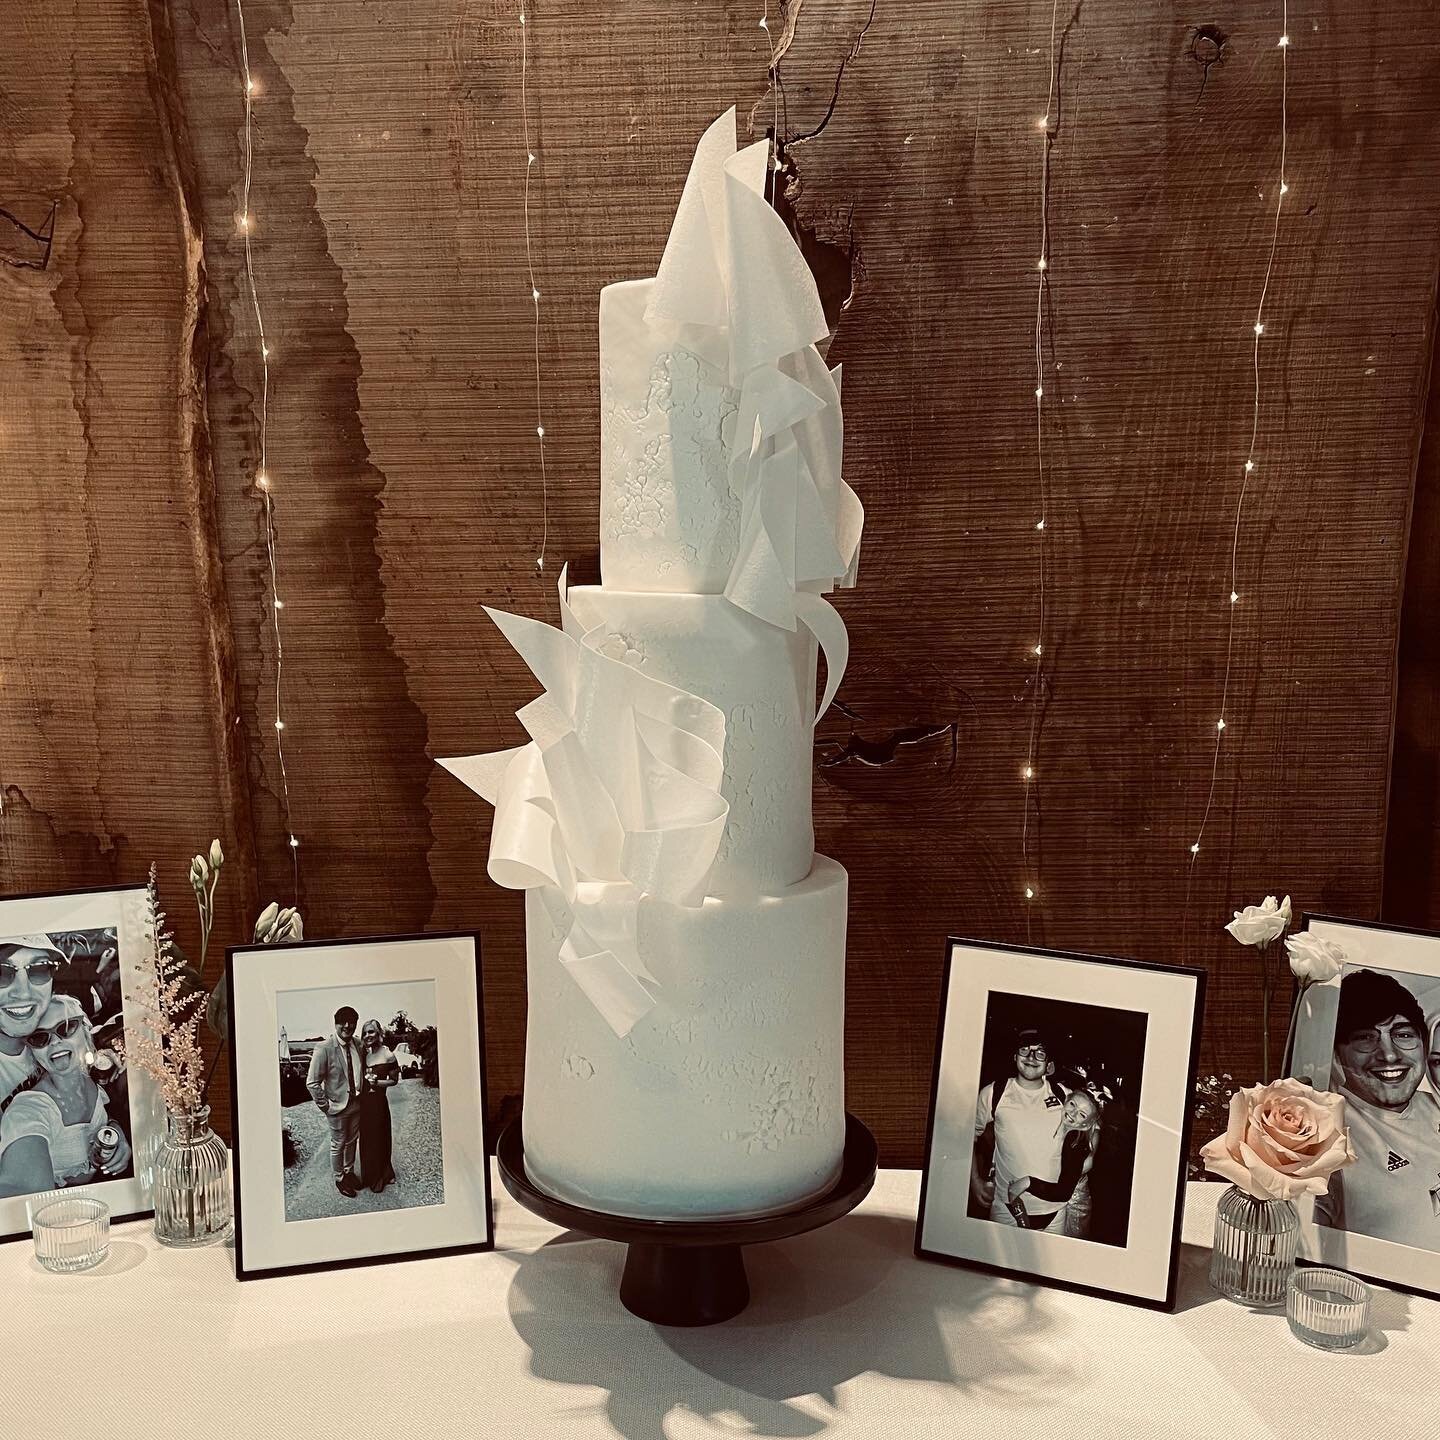 Congratulations to L&amp;C who were married at the beautiful @pentneyabbeyestate on Saturday. 
.
My first visit to this venue and it absolutely blew me away. 
.
An all white cake with texturised fondant and wafer paper sails stood beautifully within 